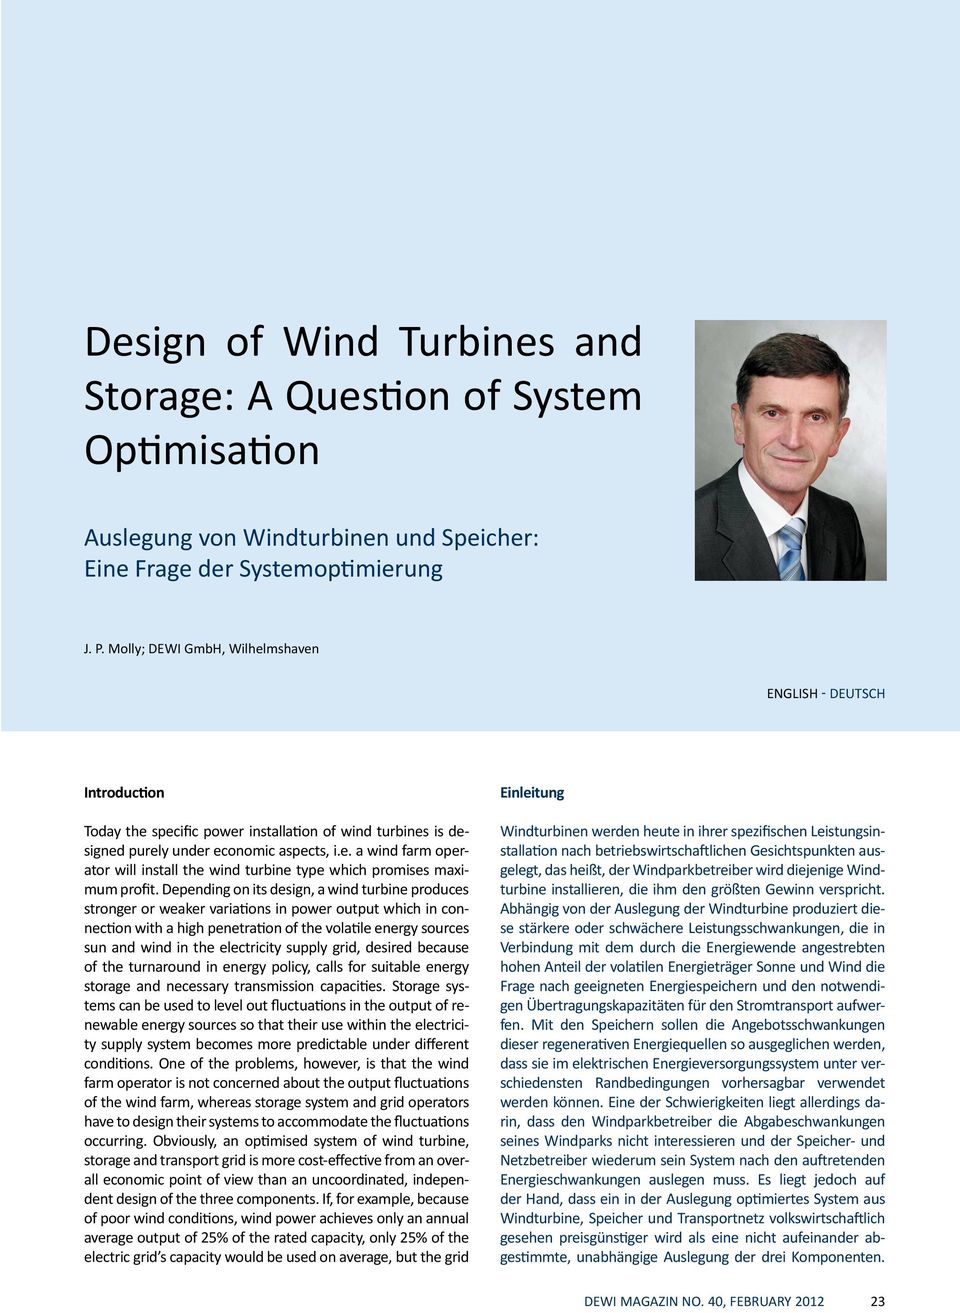 Depending on its design, a wind turbine produces stronger or weaker variations in power output which in connection with a high penetration of the volatile energy sources sun and wind in the